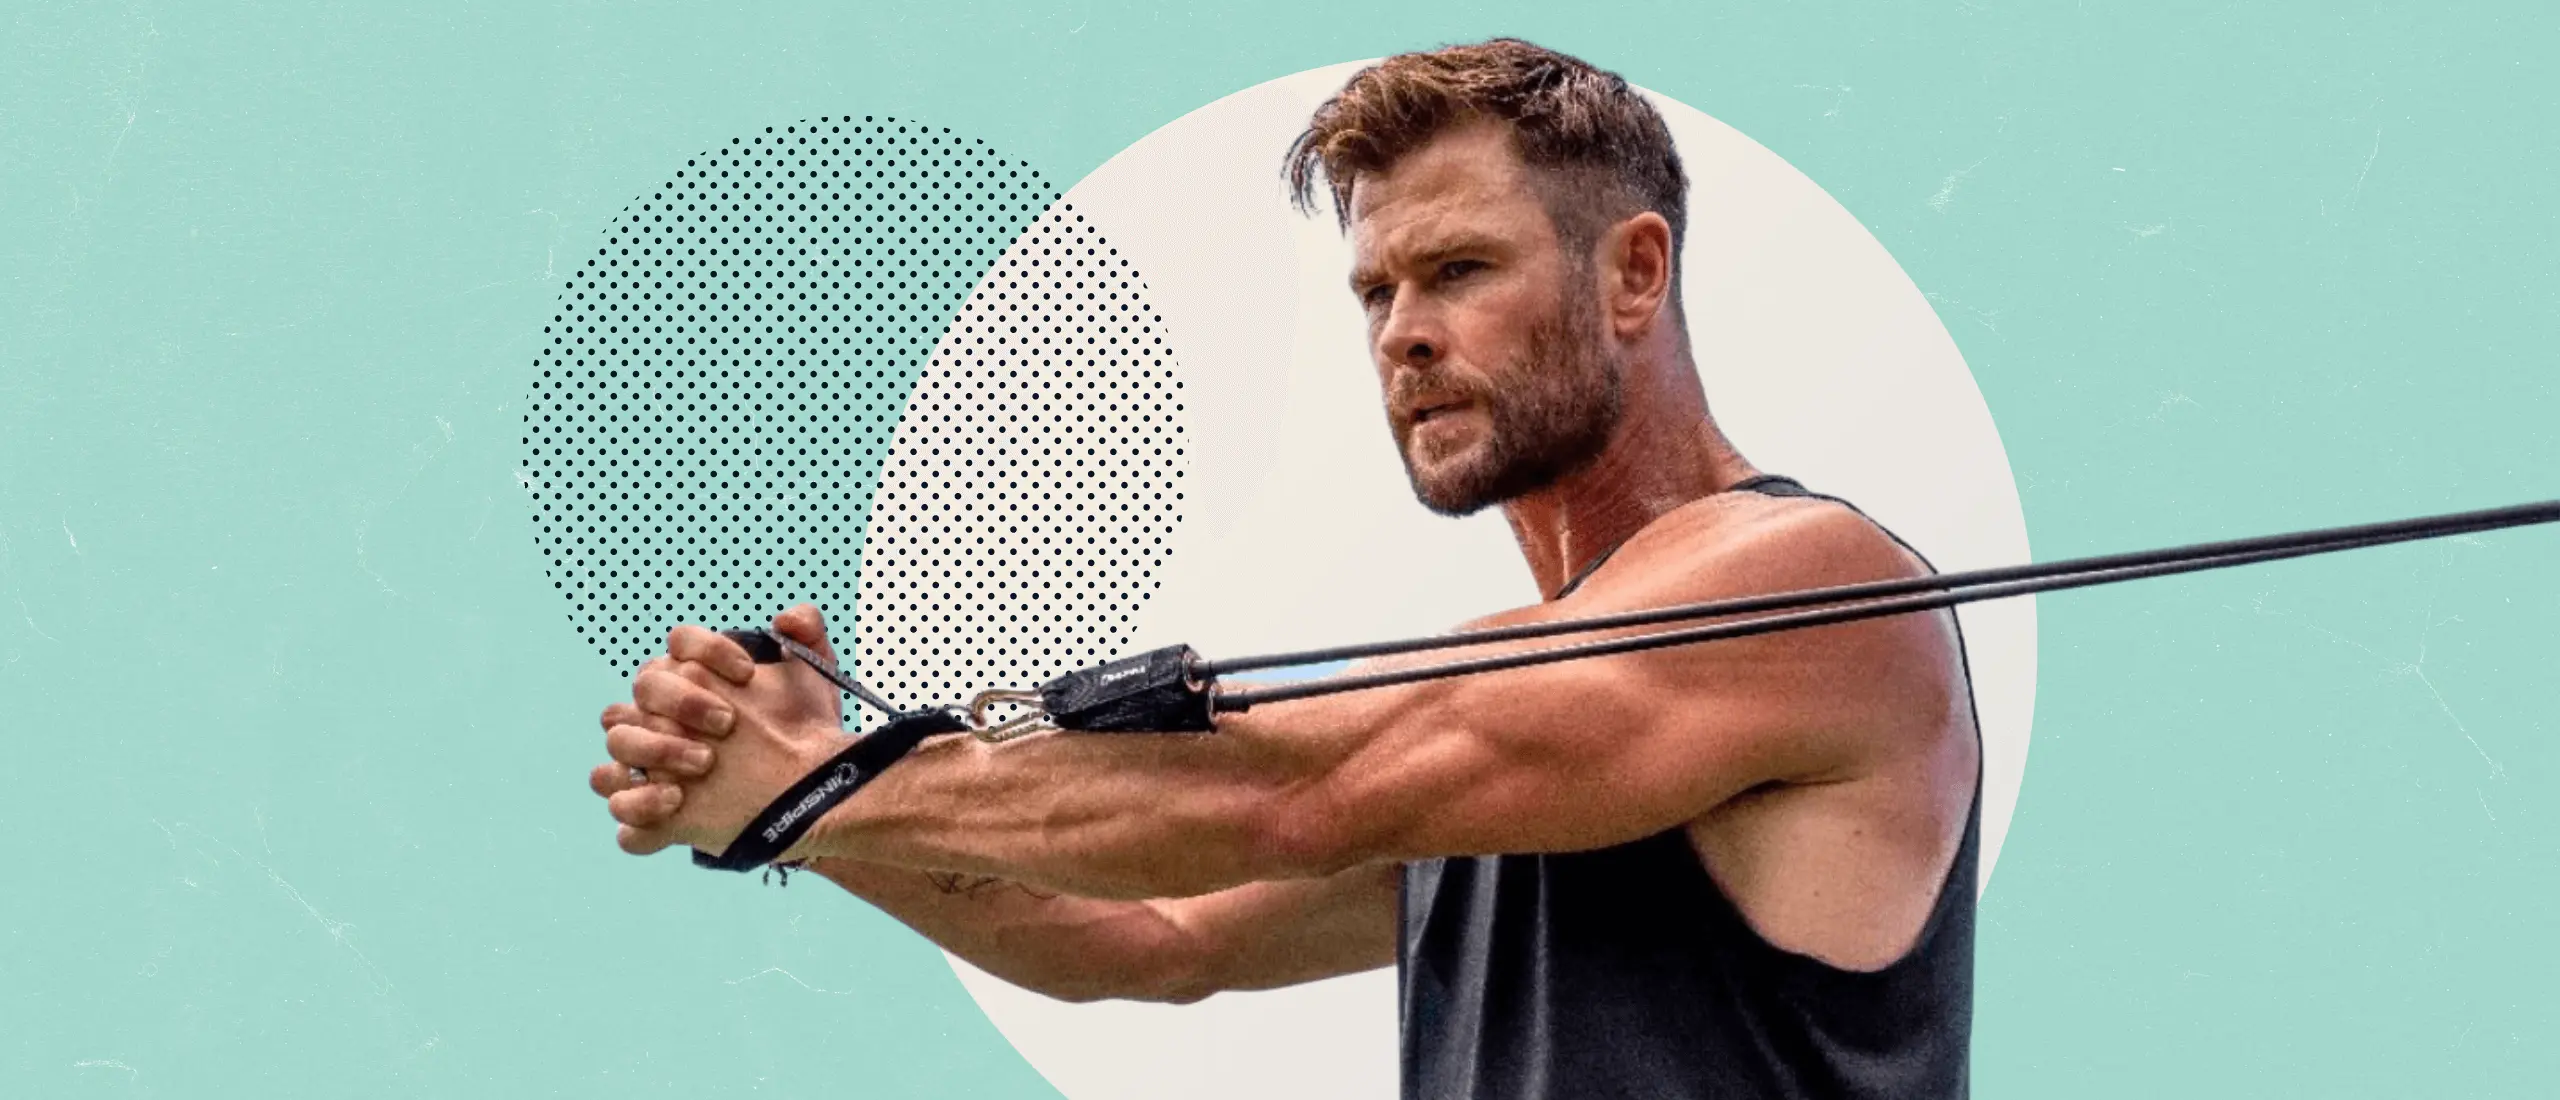 chris hemsworth does a cross body curl on a teal background